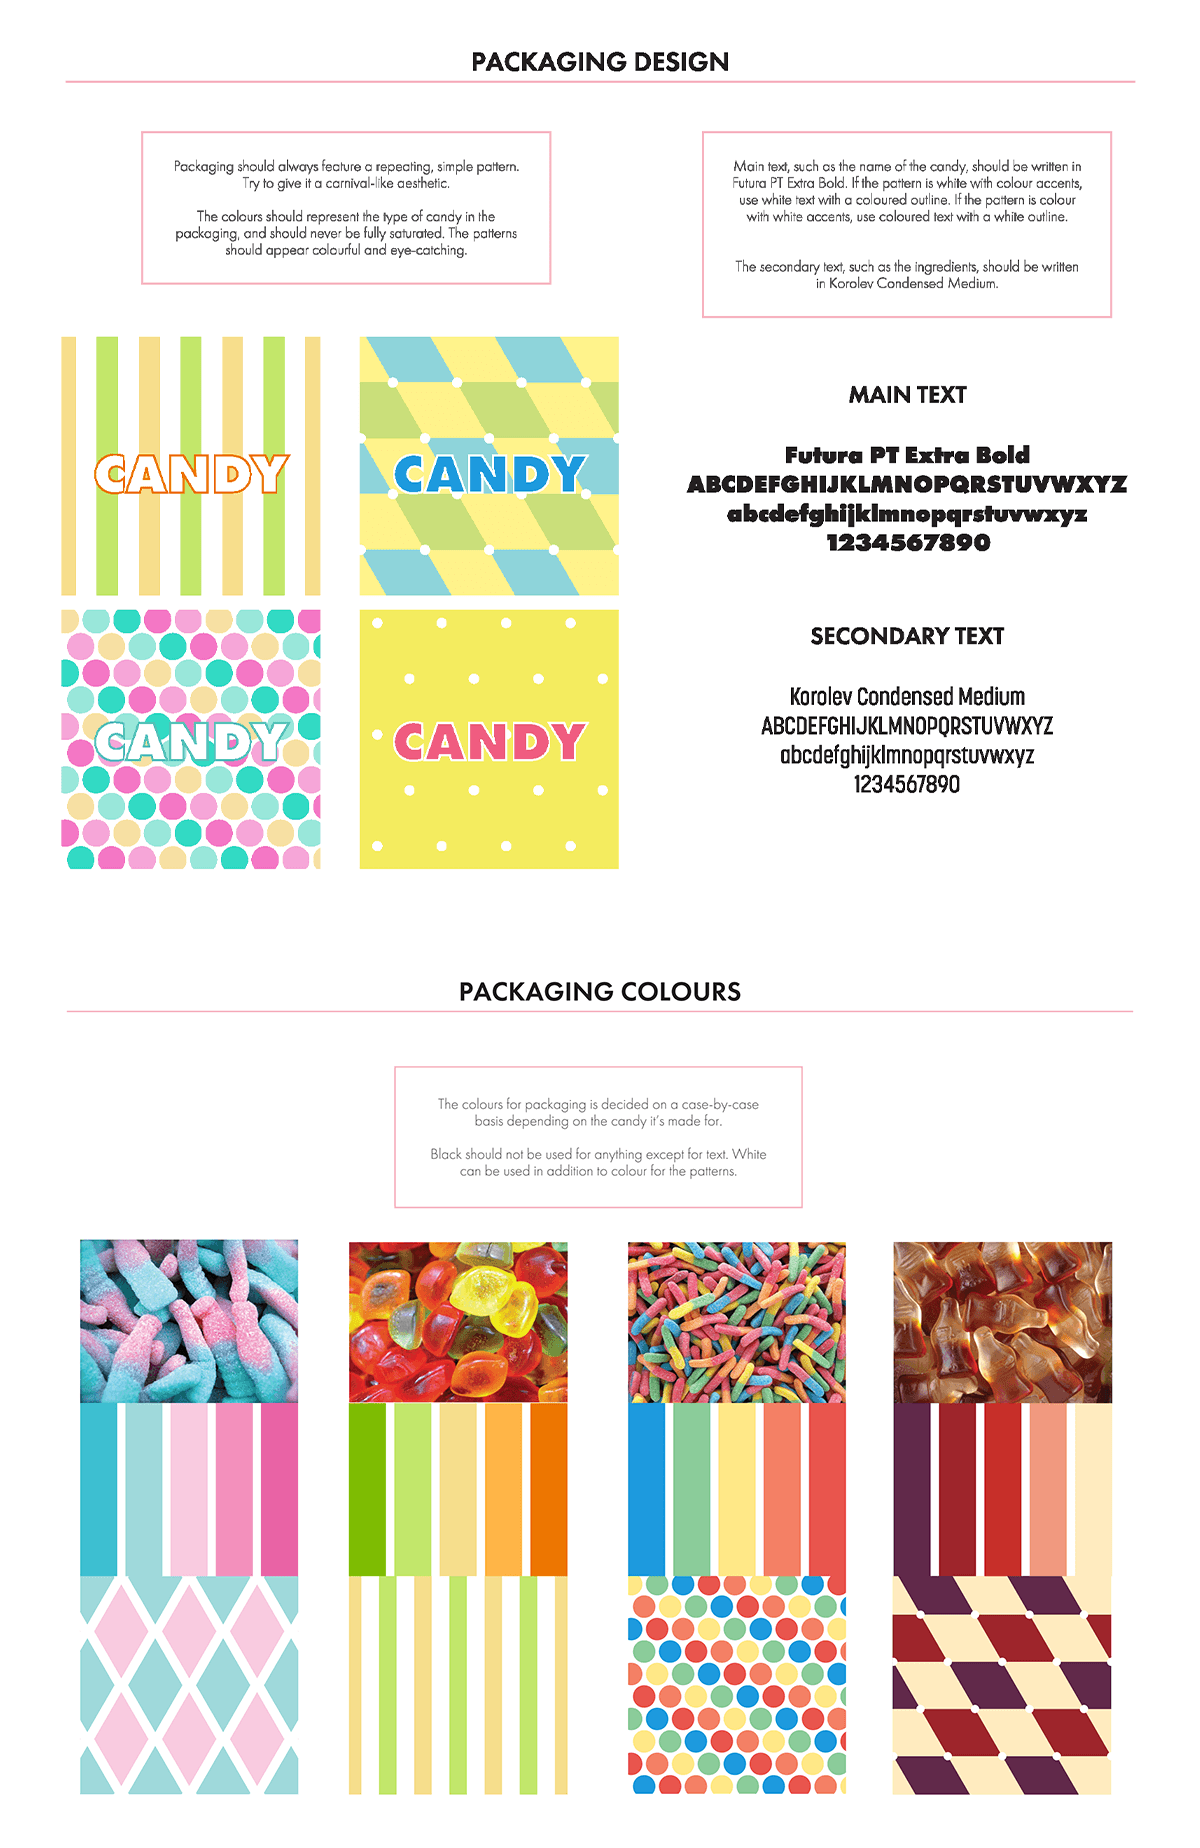 Brand guide for Sweet Dreams Confectionery explaining how to design candy packaging.